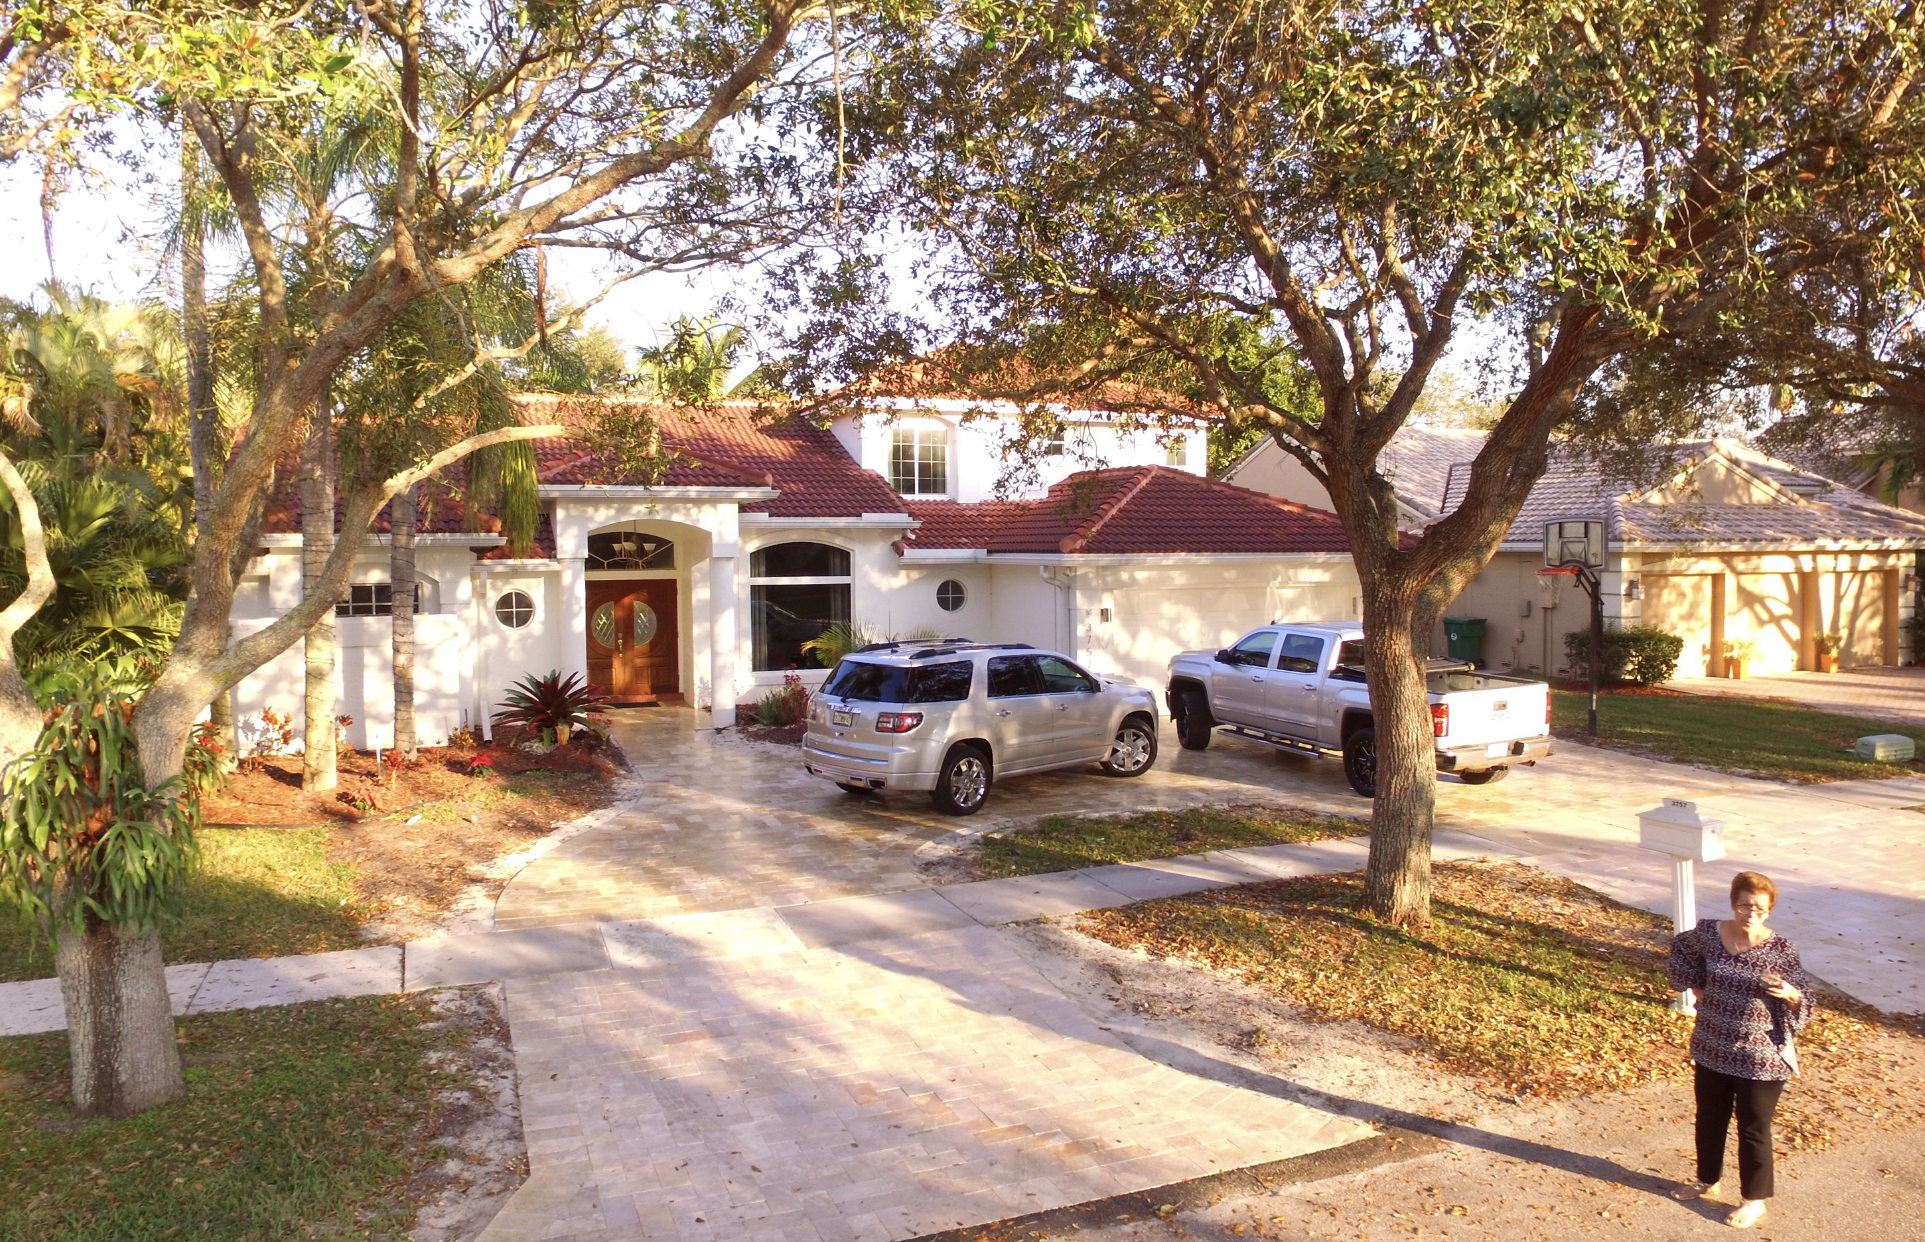 Amazing Pavers South Florida 7101 SW 185th Way, Southwest Ranches Florida 33332